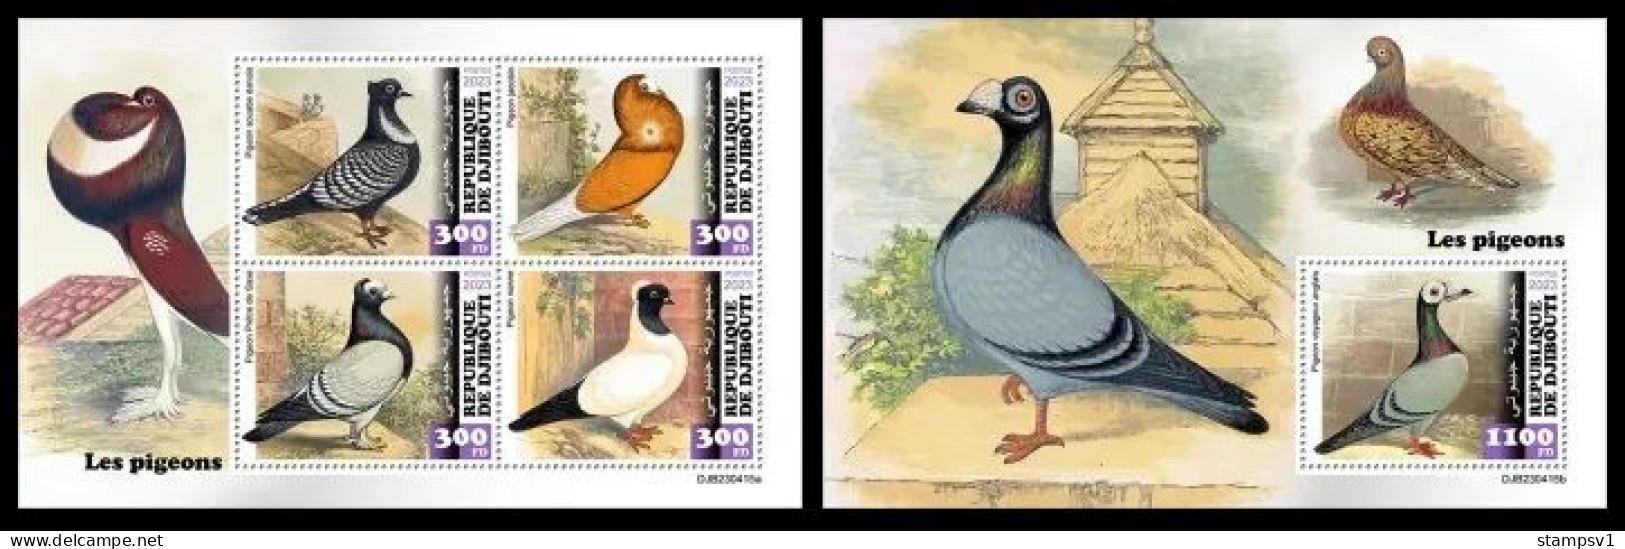 Djibouti  2023 Pigeons. (415) OFFICIAL ISSUE - Columbiformes